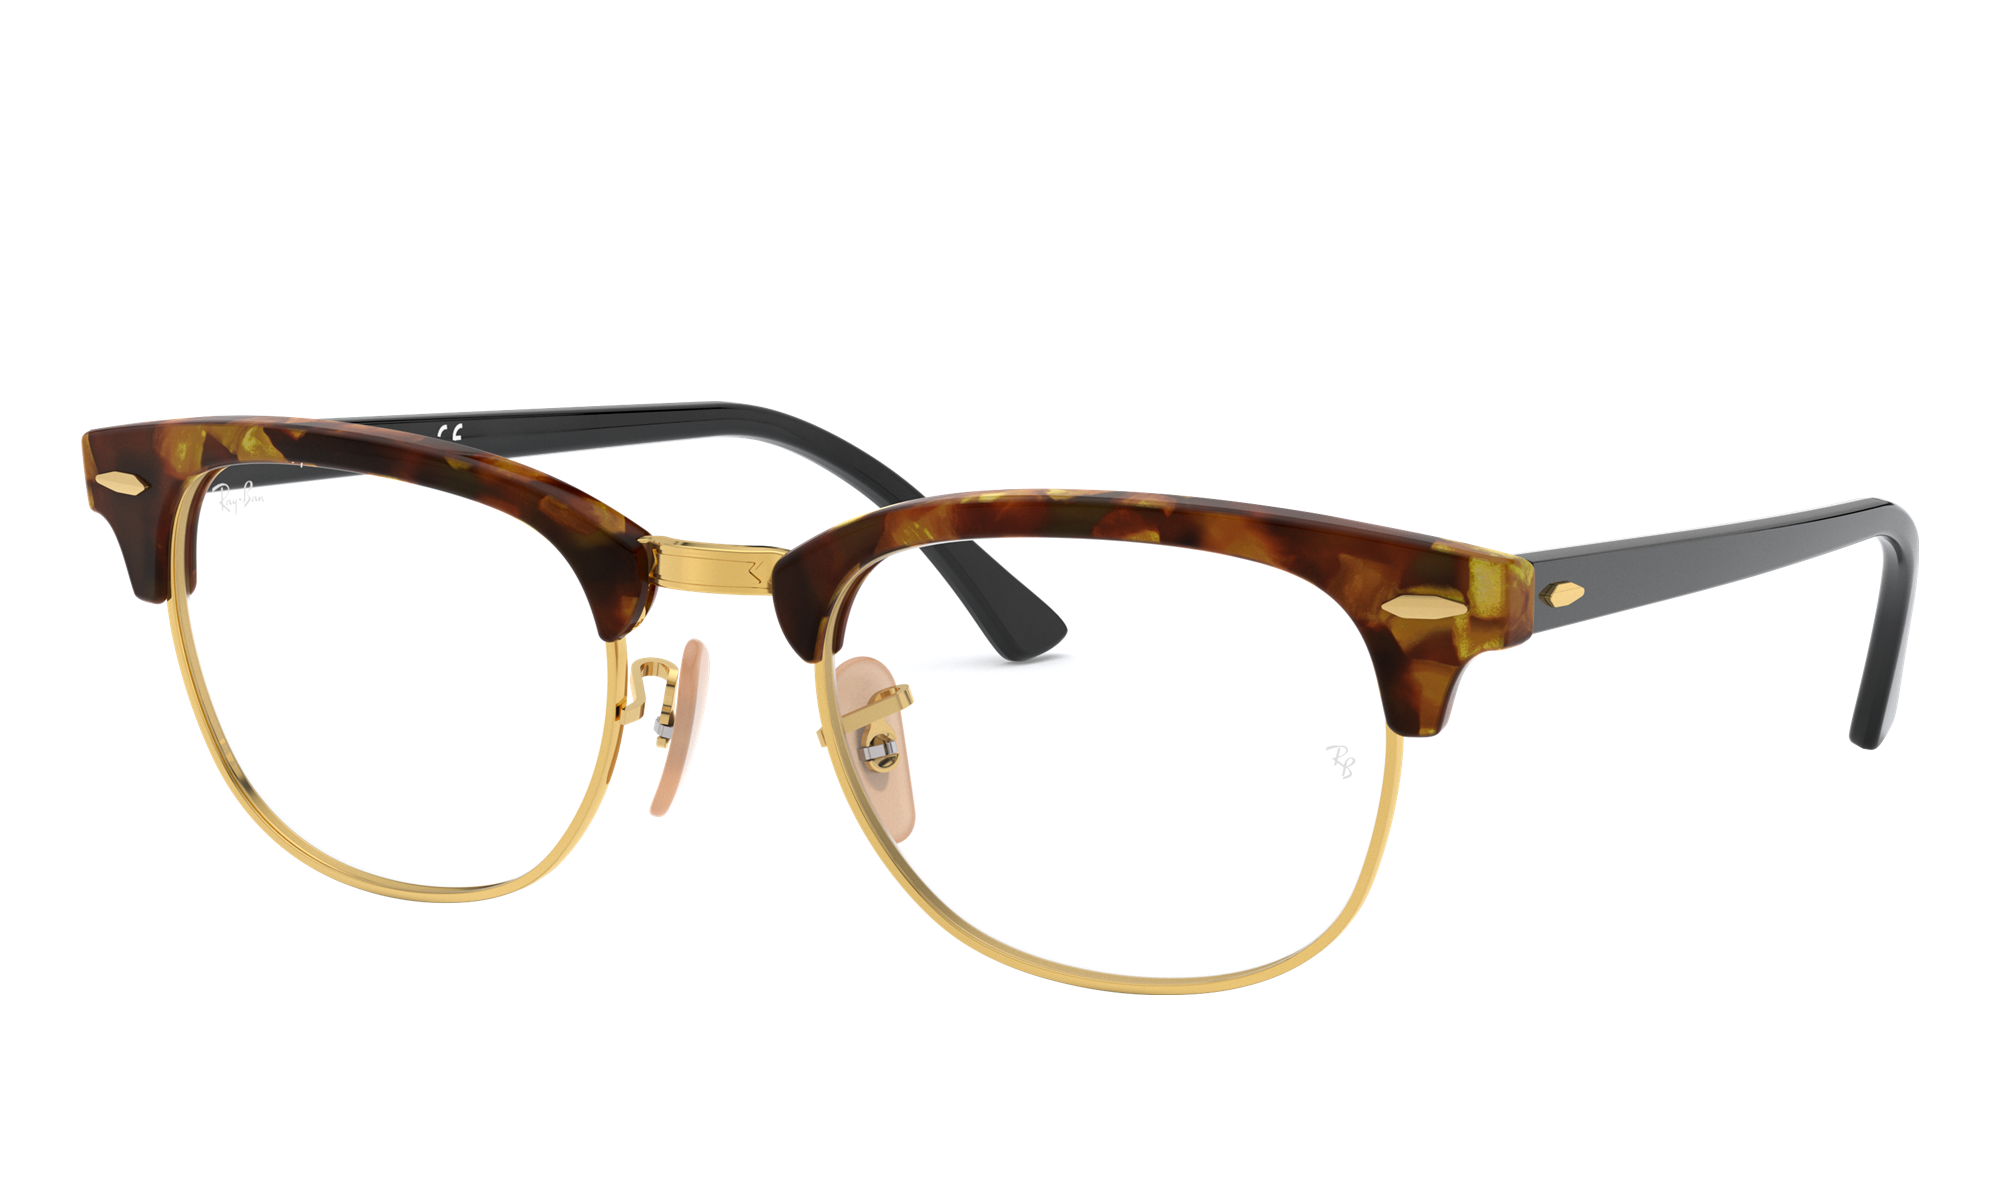 Ray-Ban Unisex Rx5154 Brown Havana Size: Large